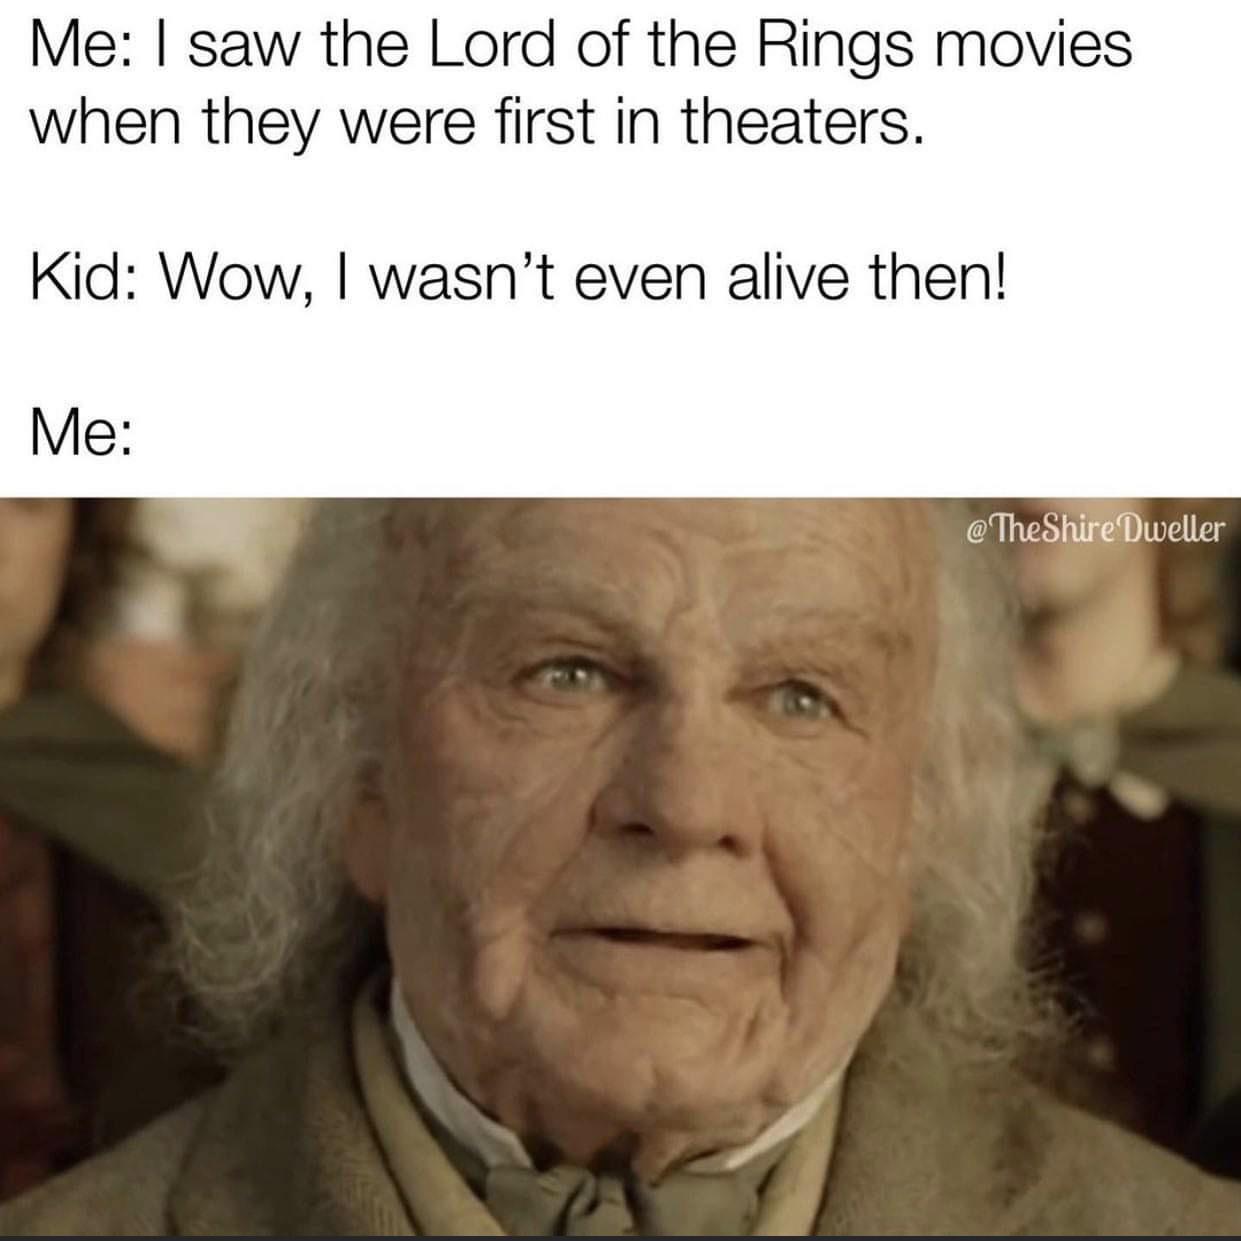 funny memes - available - Me I saw the Lord of the Rings movies when they were first in theaters. Kid Wow, I wasn't even alive then! Me Dweller